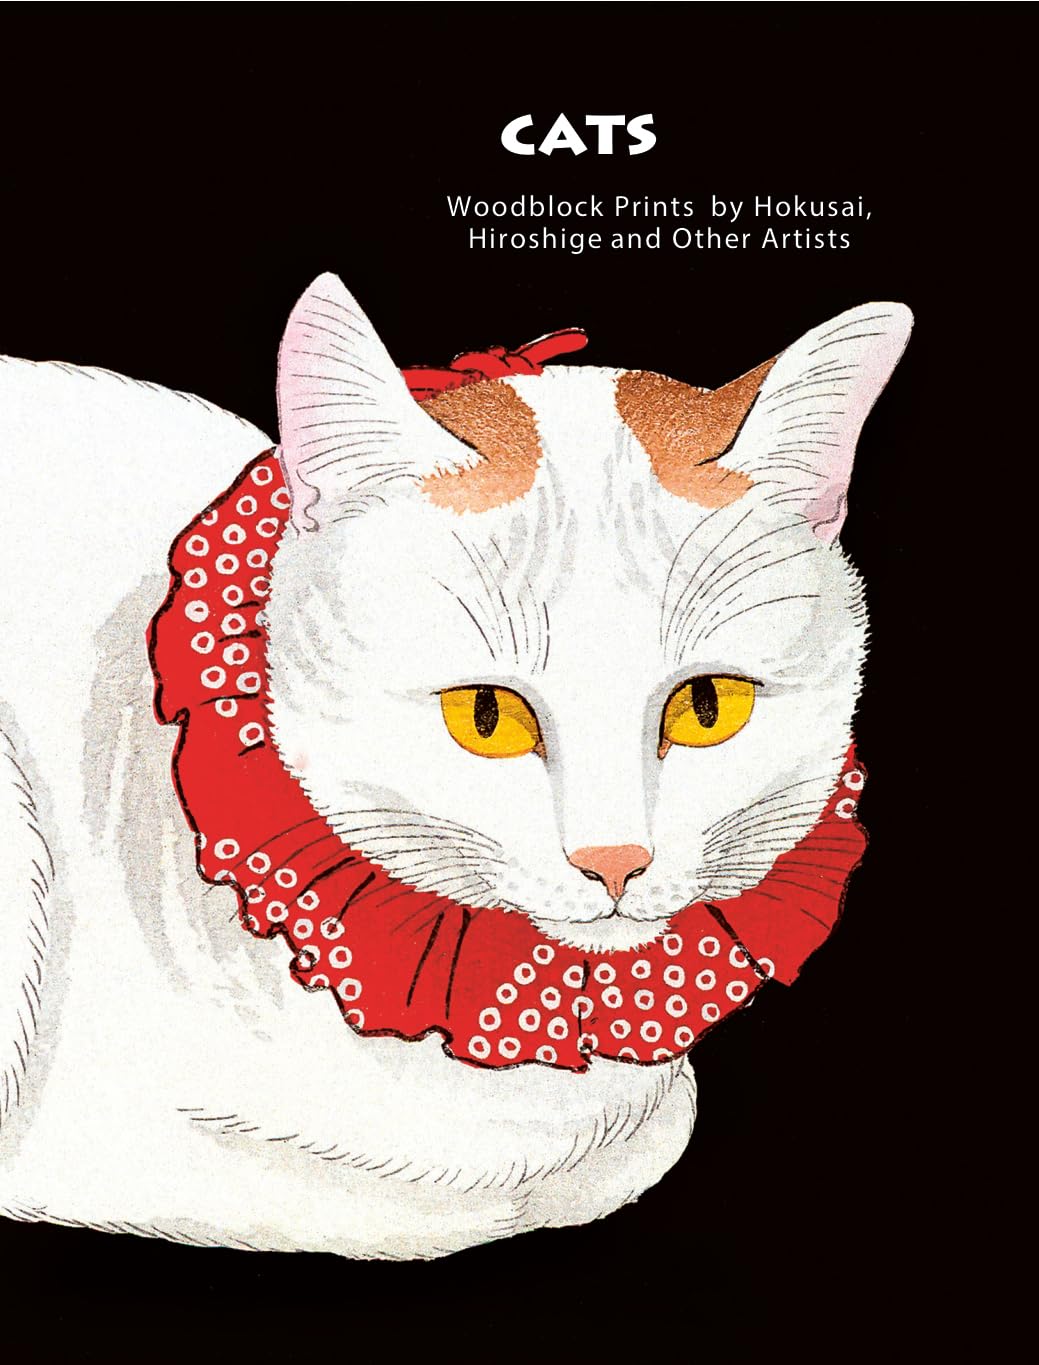 Cats of Japan: Woodblock Prints by Hokusai, Hiroshige and Other Artists